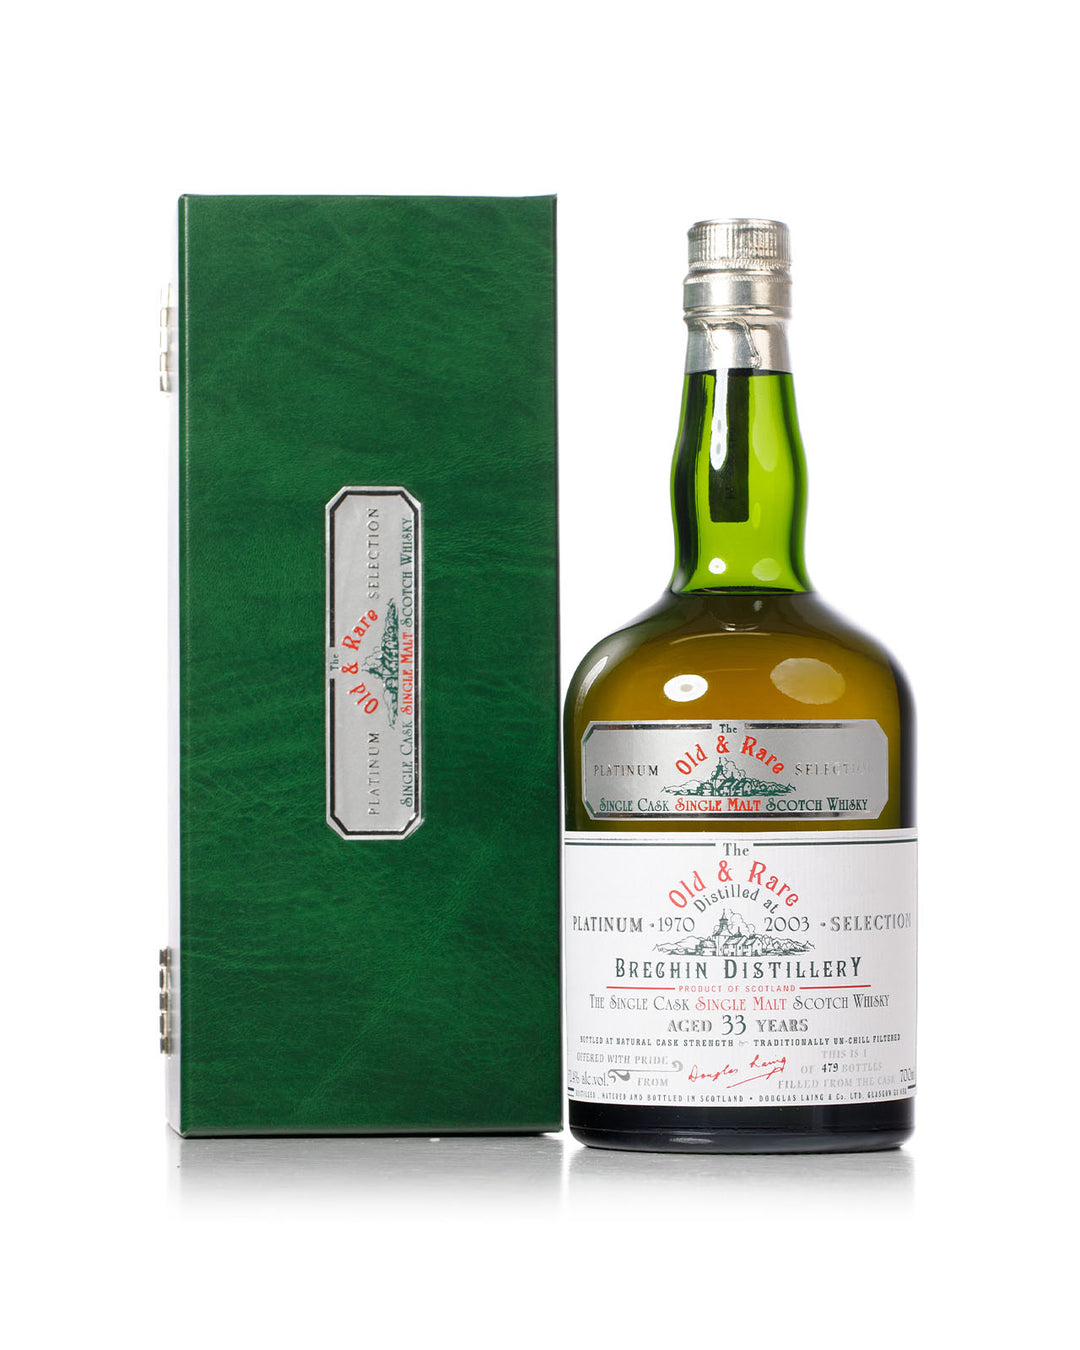 North Port Brechin 1970 33 Year Old Old & Rare Bottled 2003 With Original Box